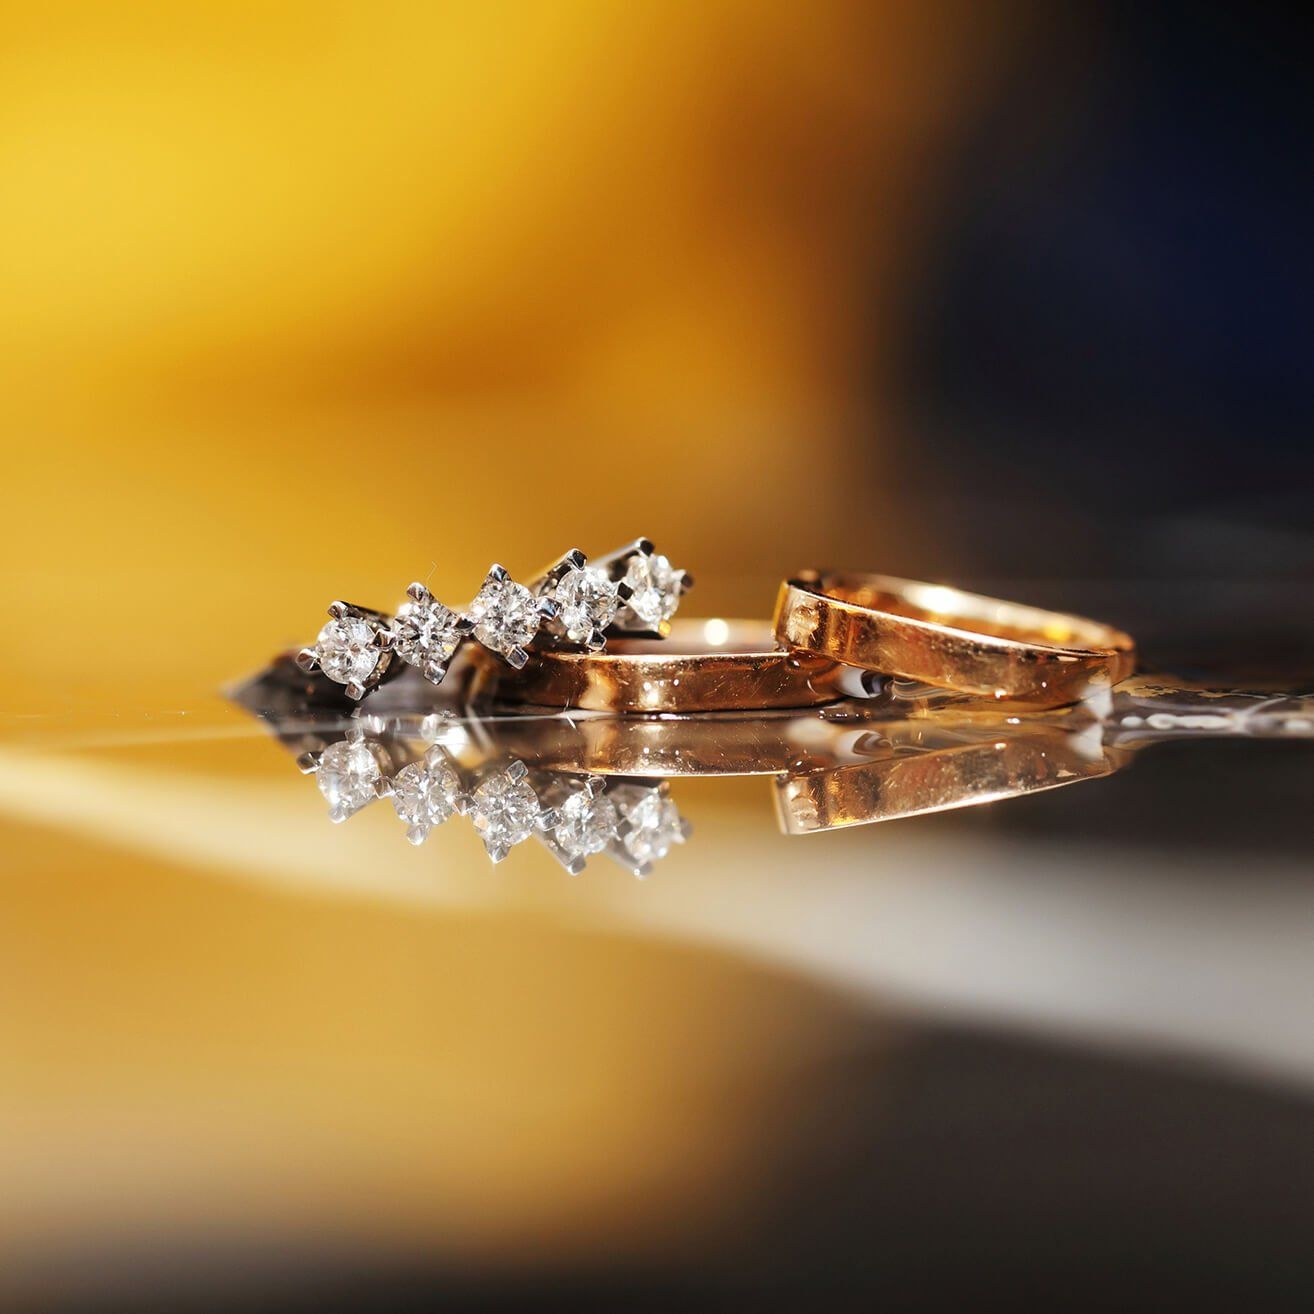 a close up of a pair of wedding rings on a table .